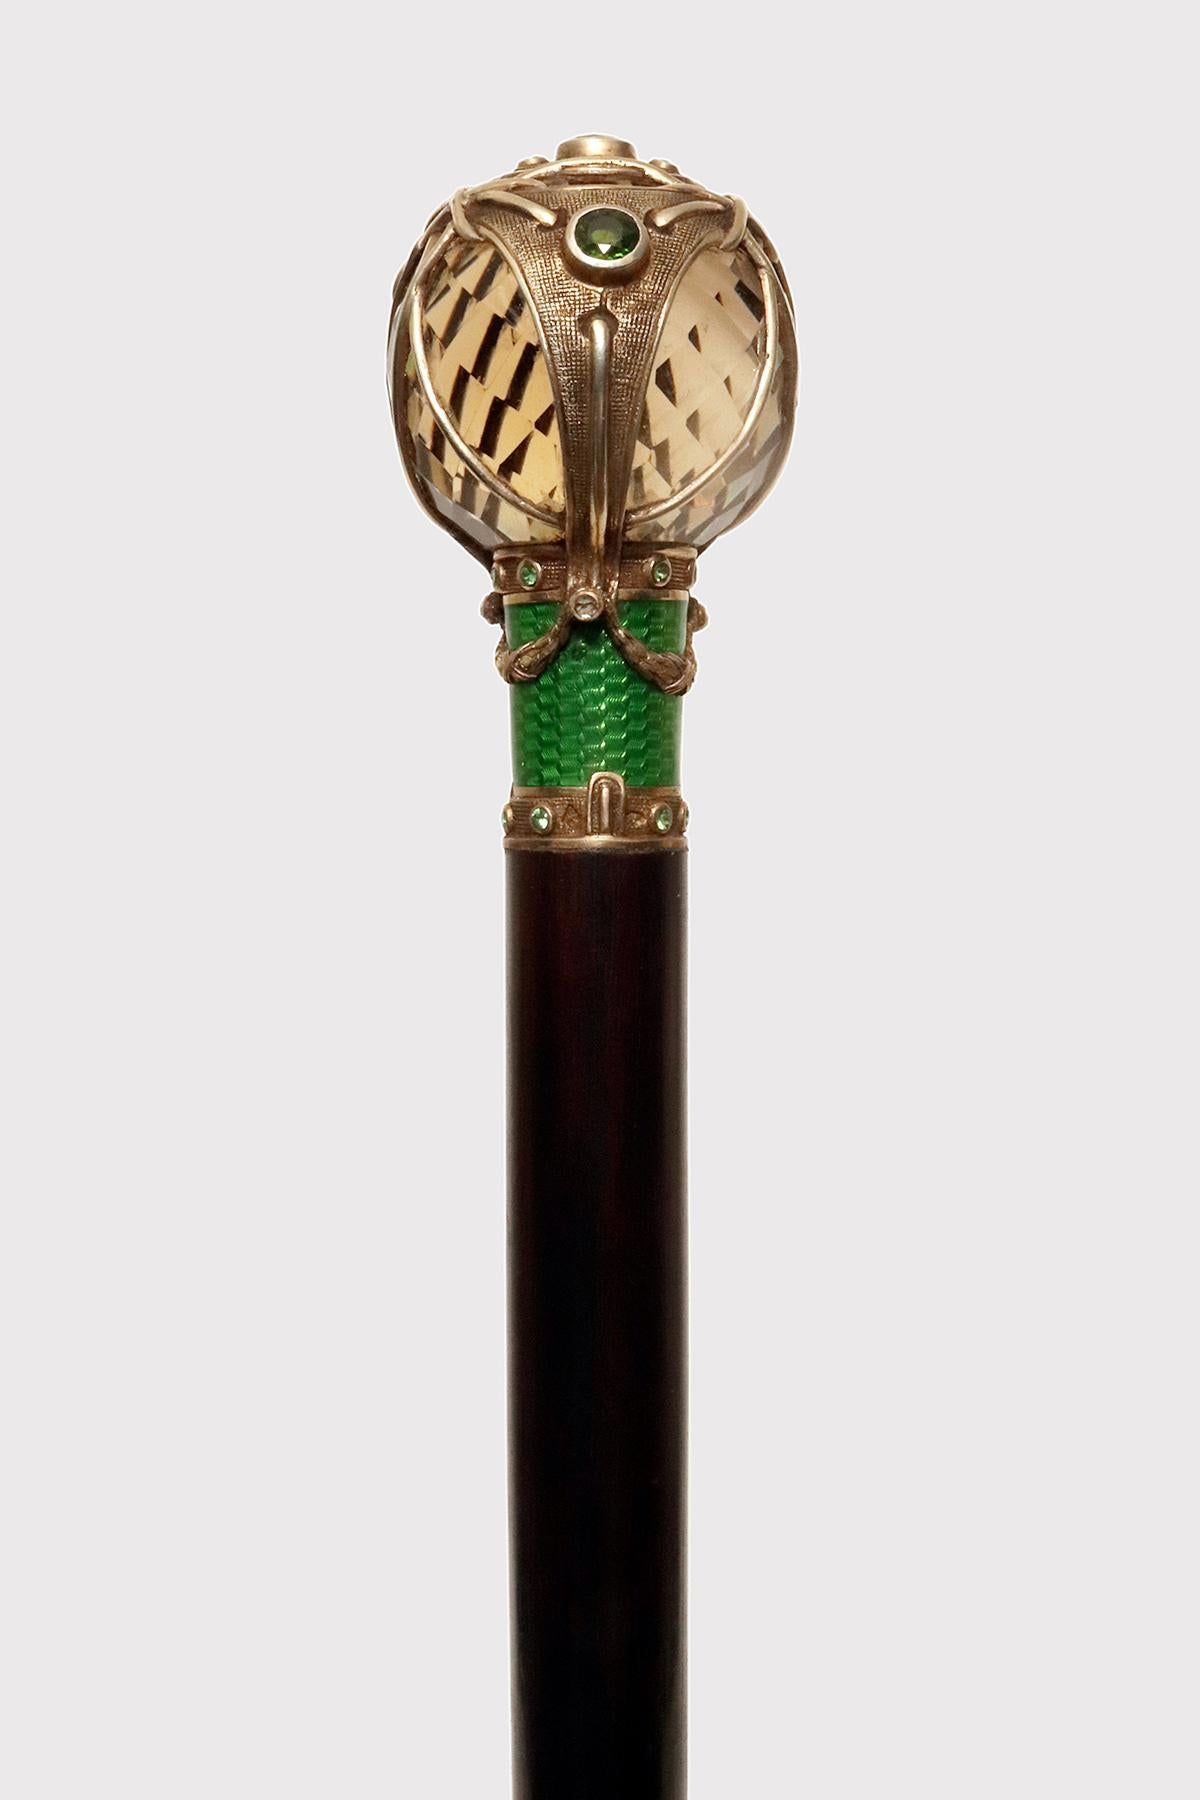 Georges Fouquet walking stick, Paris, circa 1900, signed. Knob with faceted smoky quartz sphere inside an open 18K gold cage. Ribbons with 4 faceted cut green tourmalines, 18K gold band and green guilloche enamel. Ebony wood barrel. Alphonse